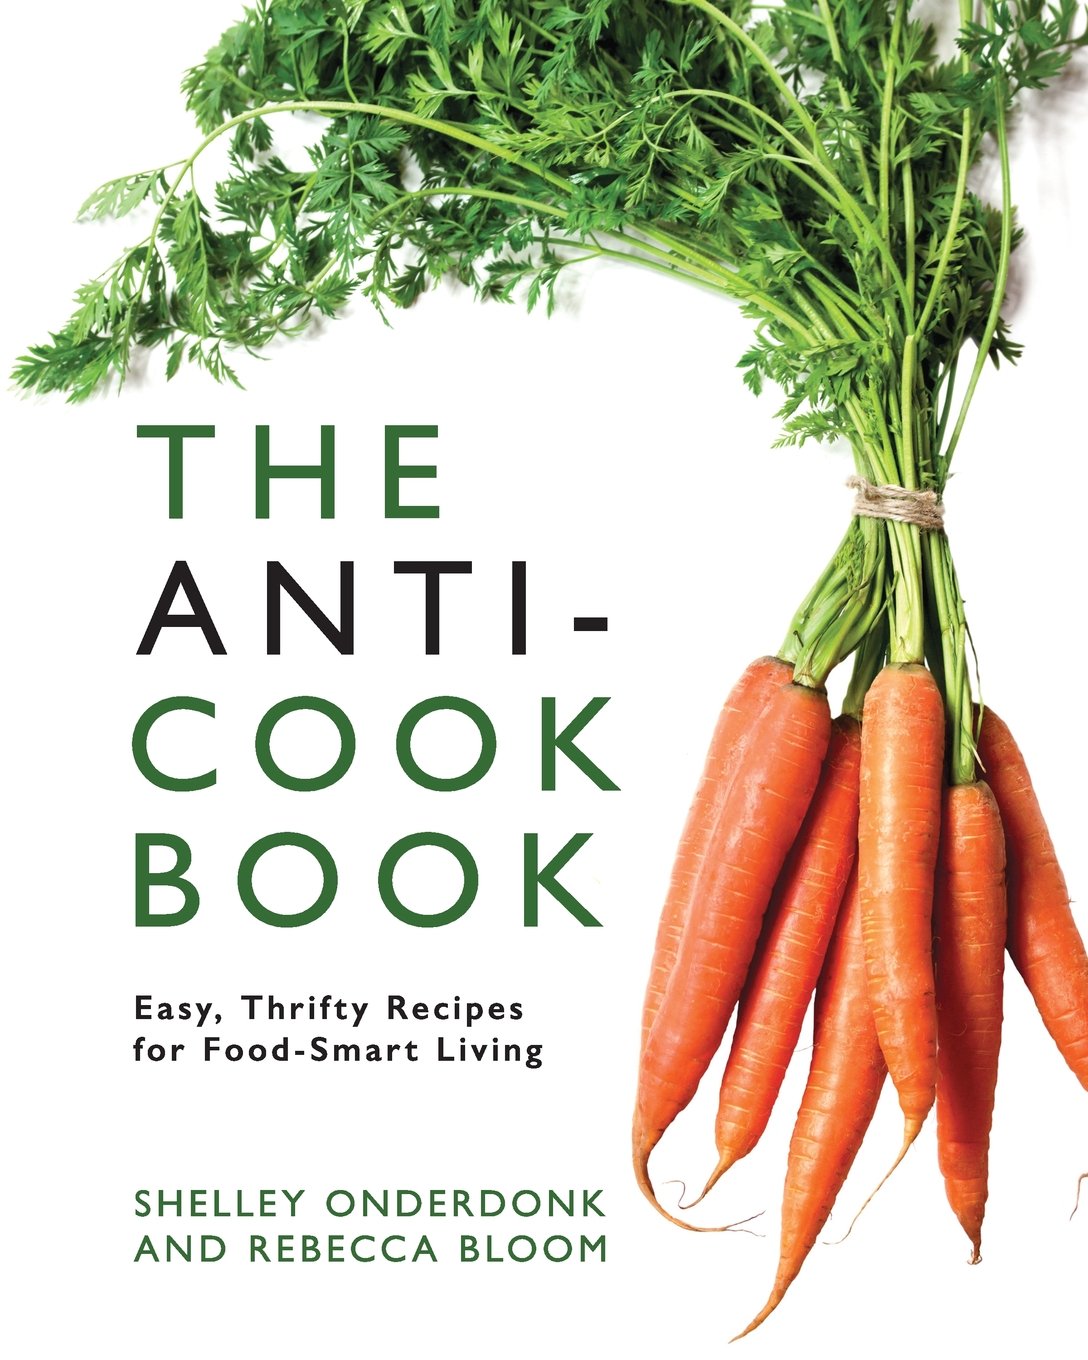 The Anti-Cookbook: Easy, Thrifty Recipes for Food-Smart Living by Shelley Onderdonk & Rebecca Bloom, $18 @amazon.com or your local bookseller